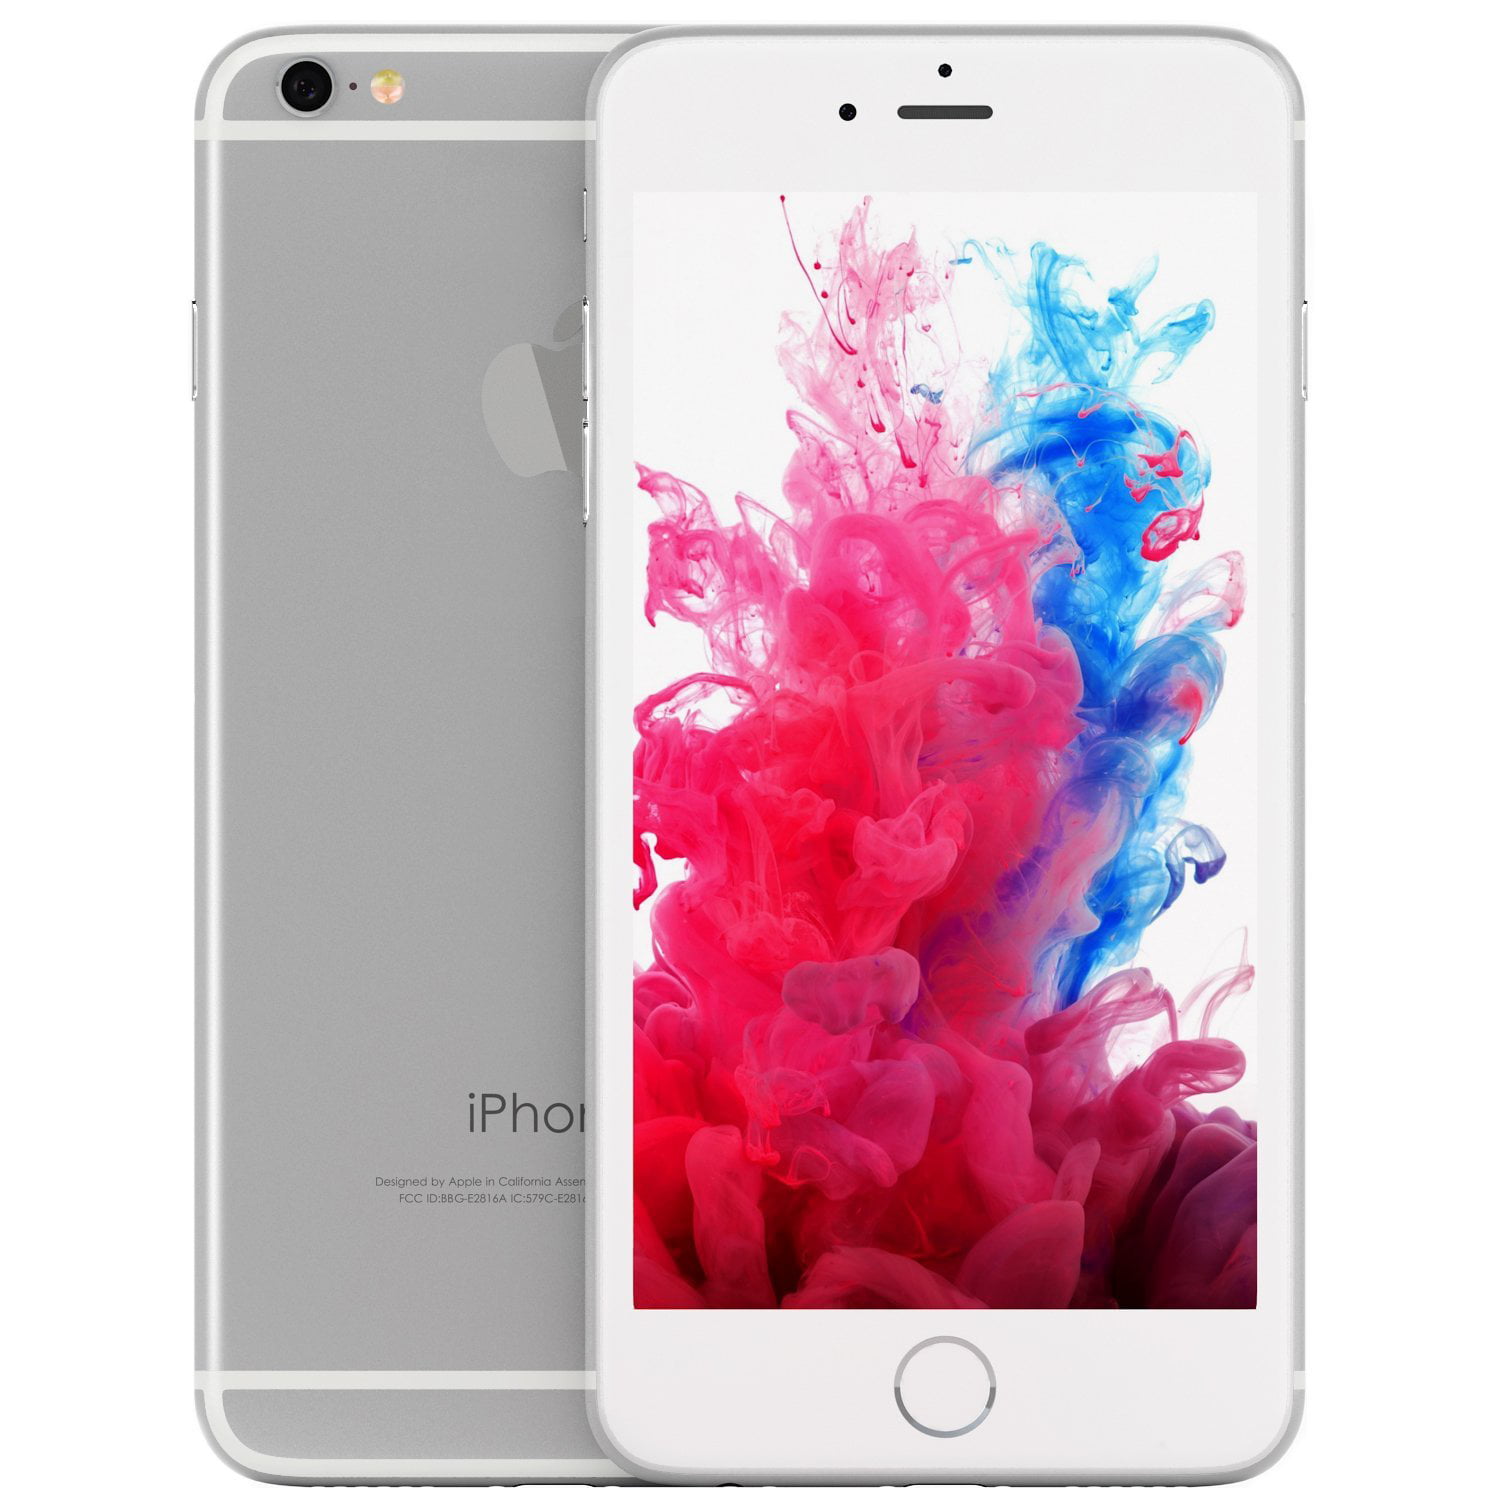 Buy Refurbished Apple iPhone 6 32GB Online in India at Lowest Price